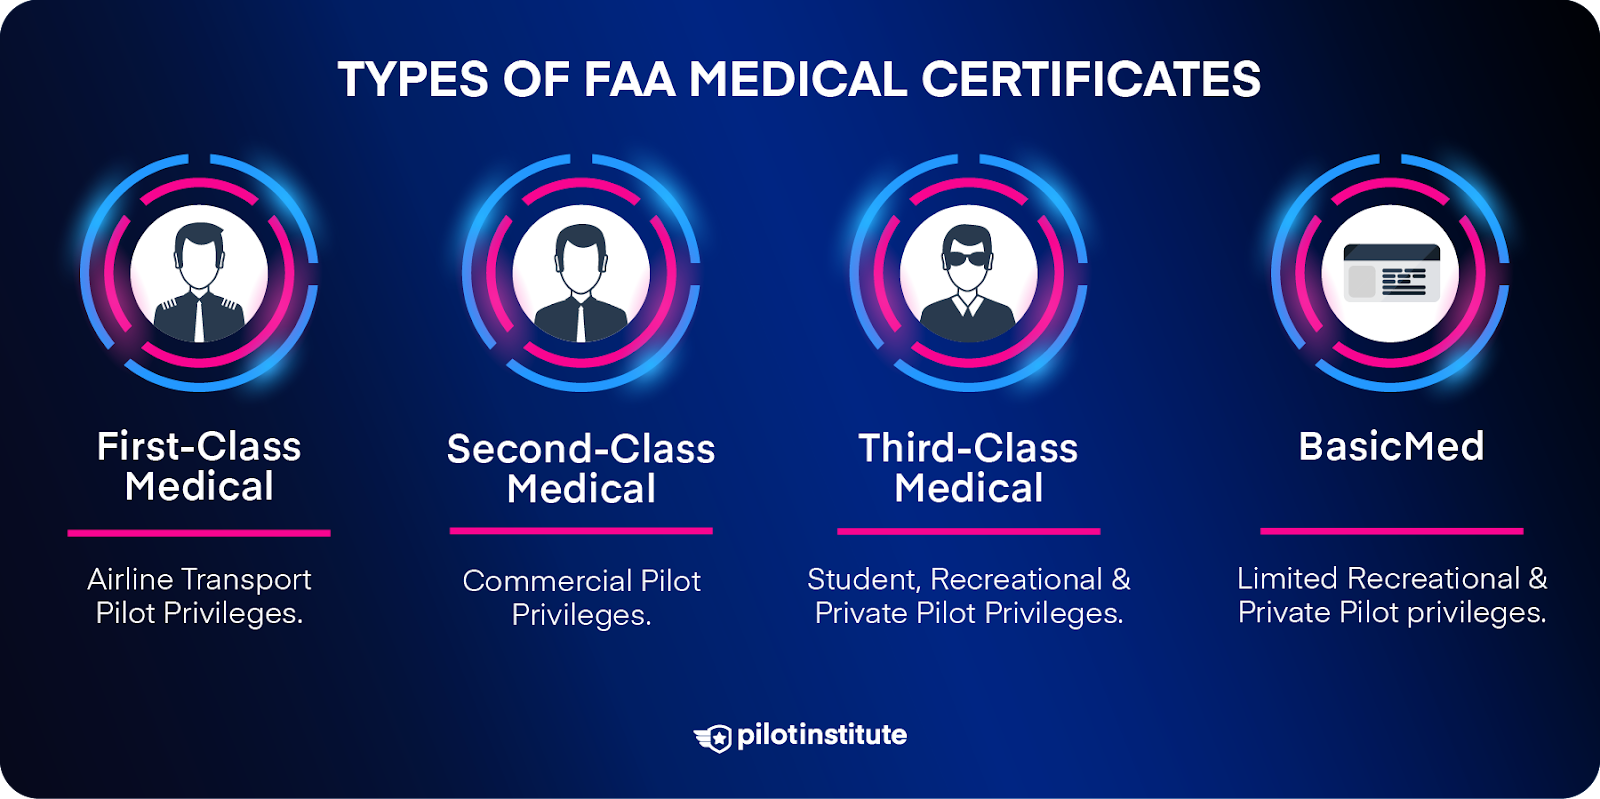 Types of FAA Medical Certificates infographic. 